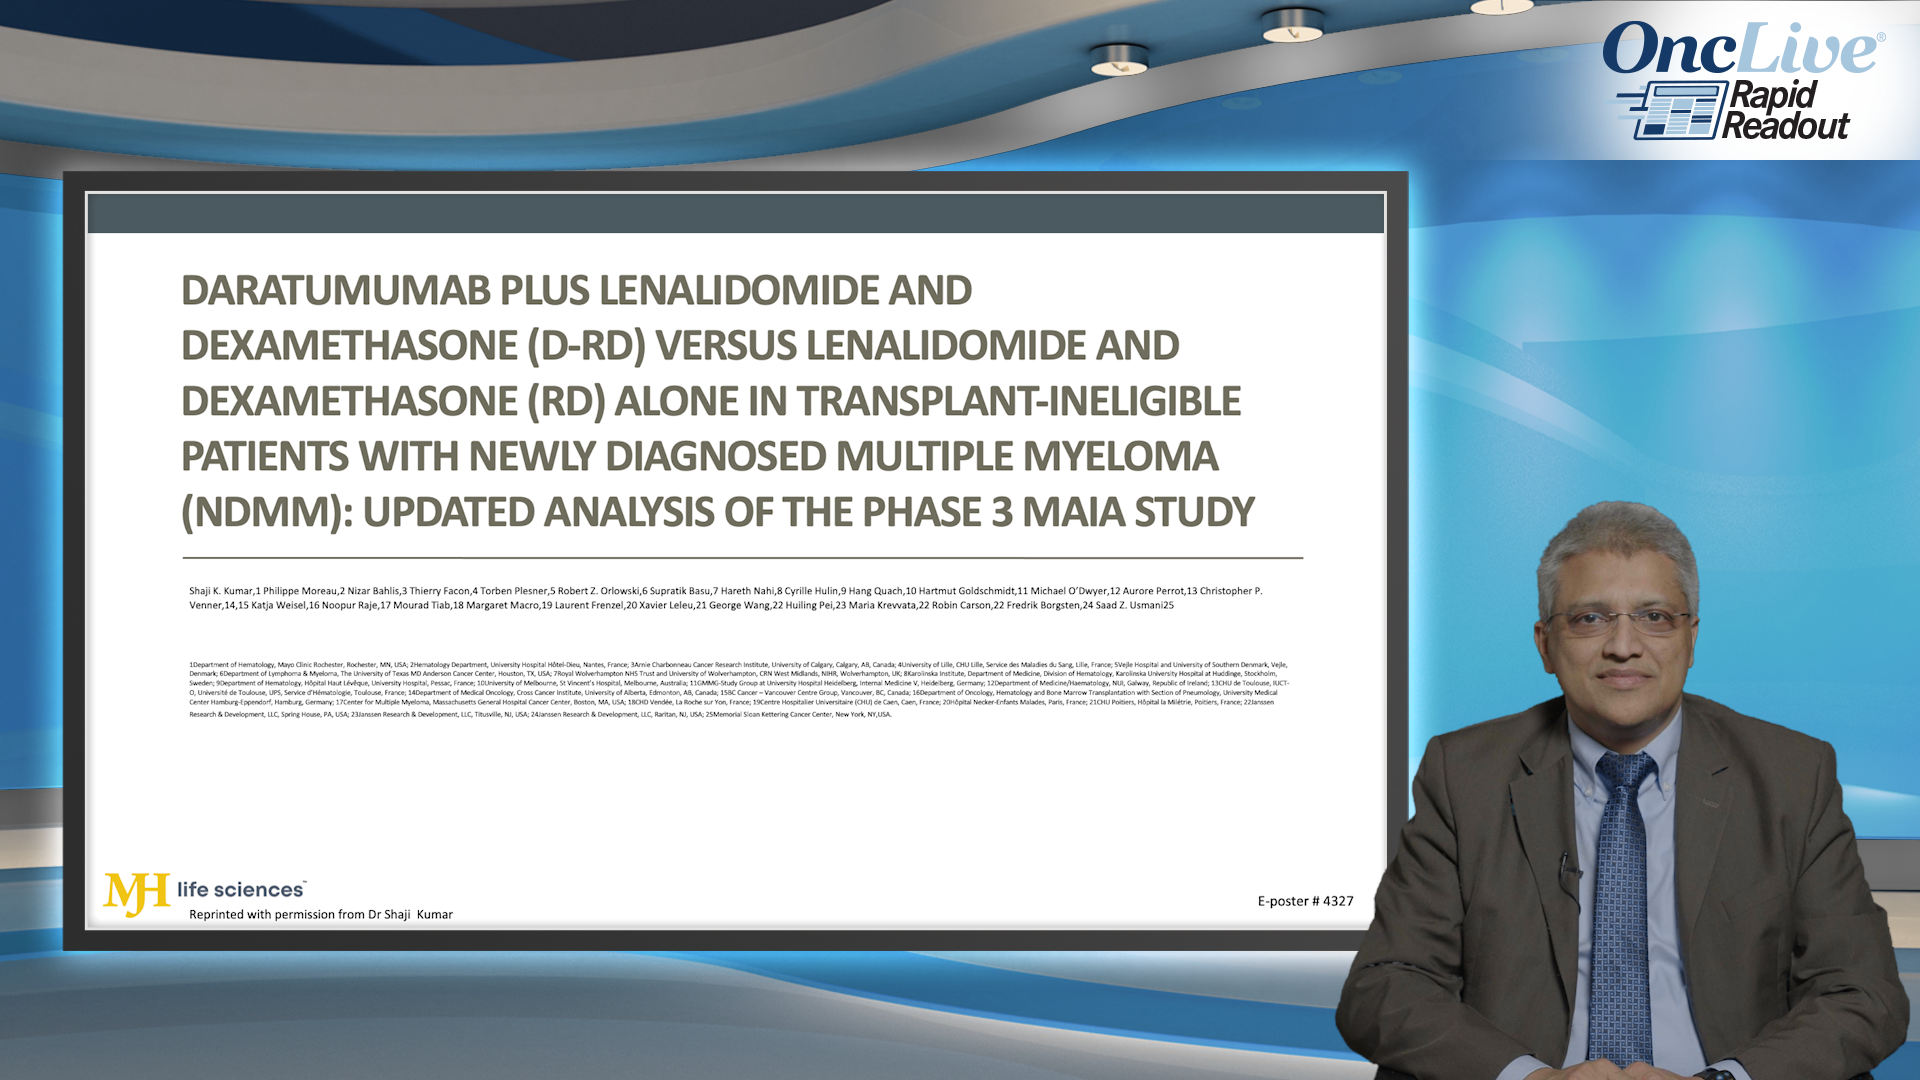 Daratumumab Plus Lenalidomide and Dexamethasone (D-Rd) Versus Lenalidomide and Dexamethasone (Rd) Alone in Transplant-ineligible Patients With Newly Diagnosed Multiple Myeloma (NDMM): Updated Analysis of the Phase 3 MAIA Study